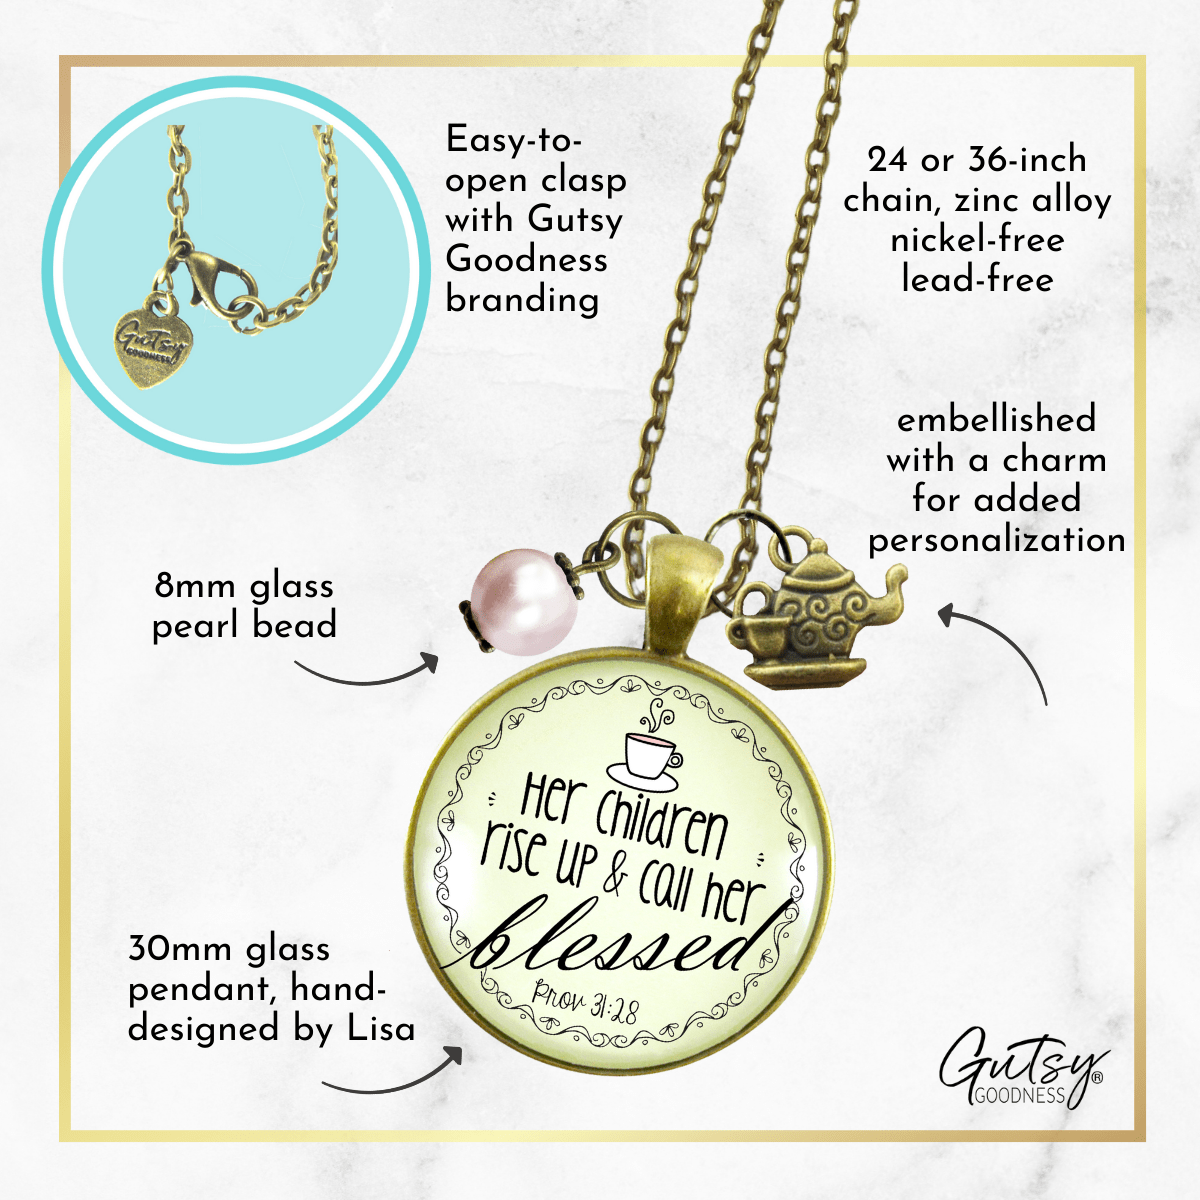 Gutsy Goodness Blessed Mother Necklace Proverb 31 Christian Mom Jewelry Teapot Charm - Gutsy Goodness;Blessed Mother Necklace Proverb 31 Christian Mom Jewelry Teapot Charm - Gutsy Goodness Handmade Jewelry Gifts